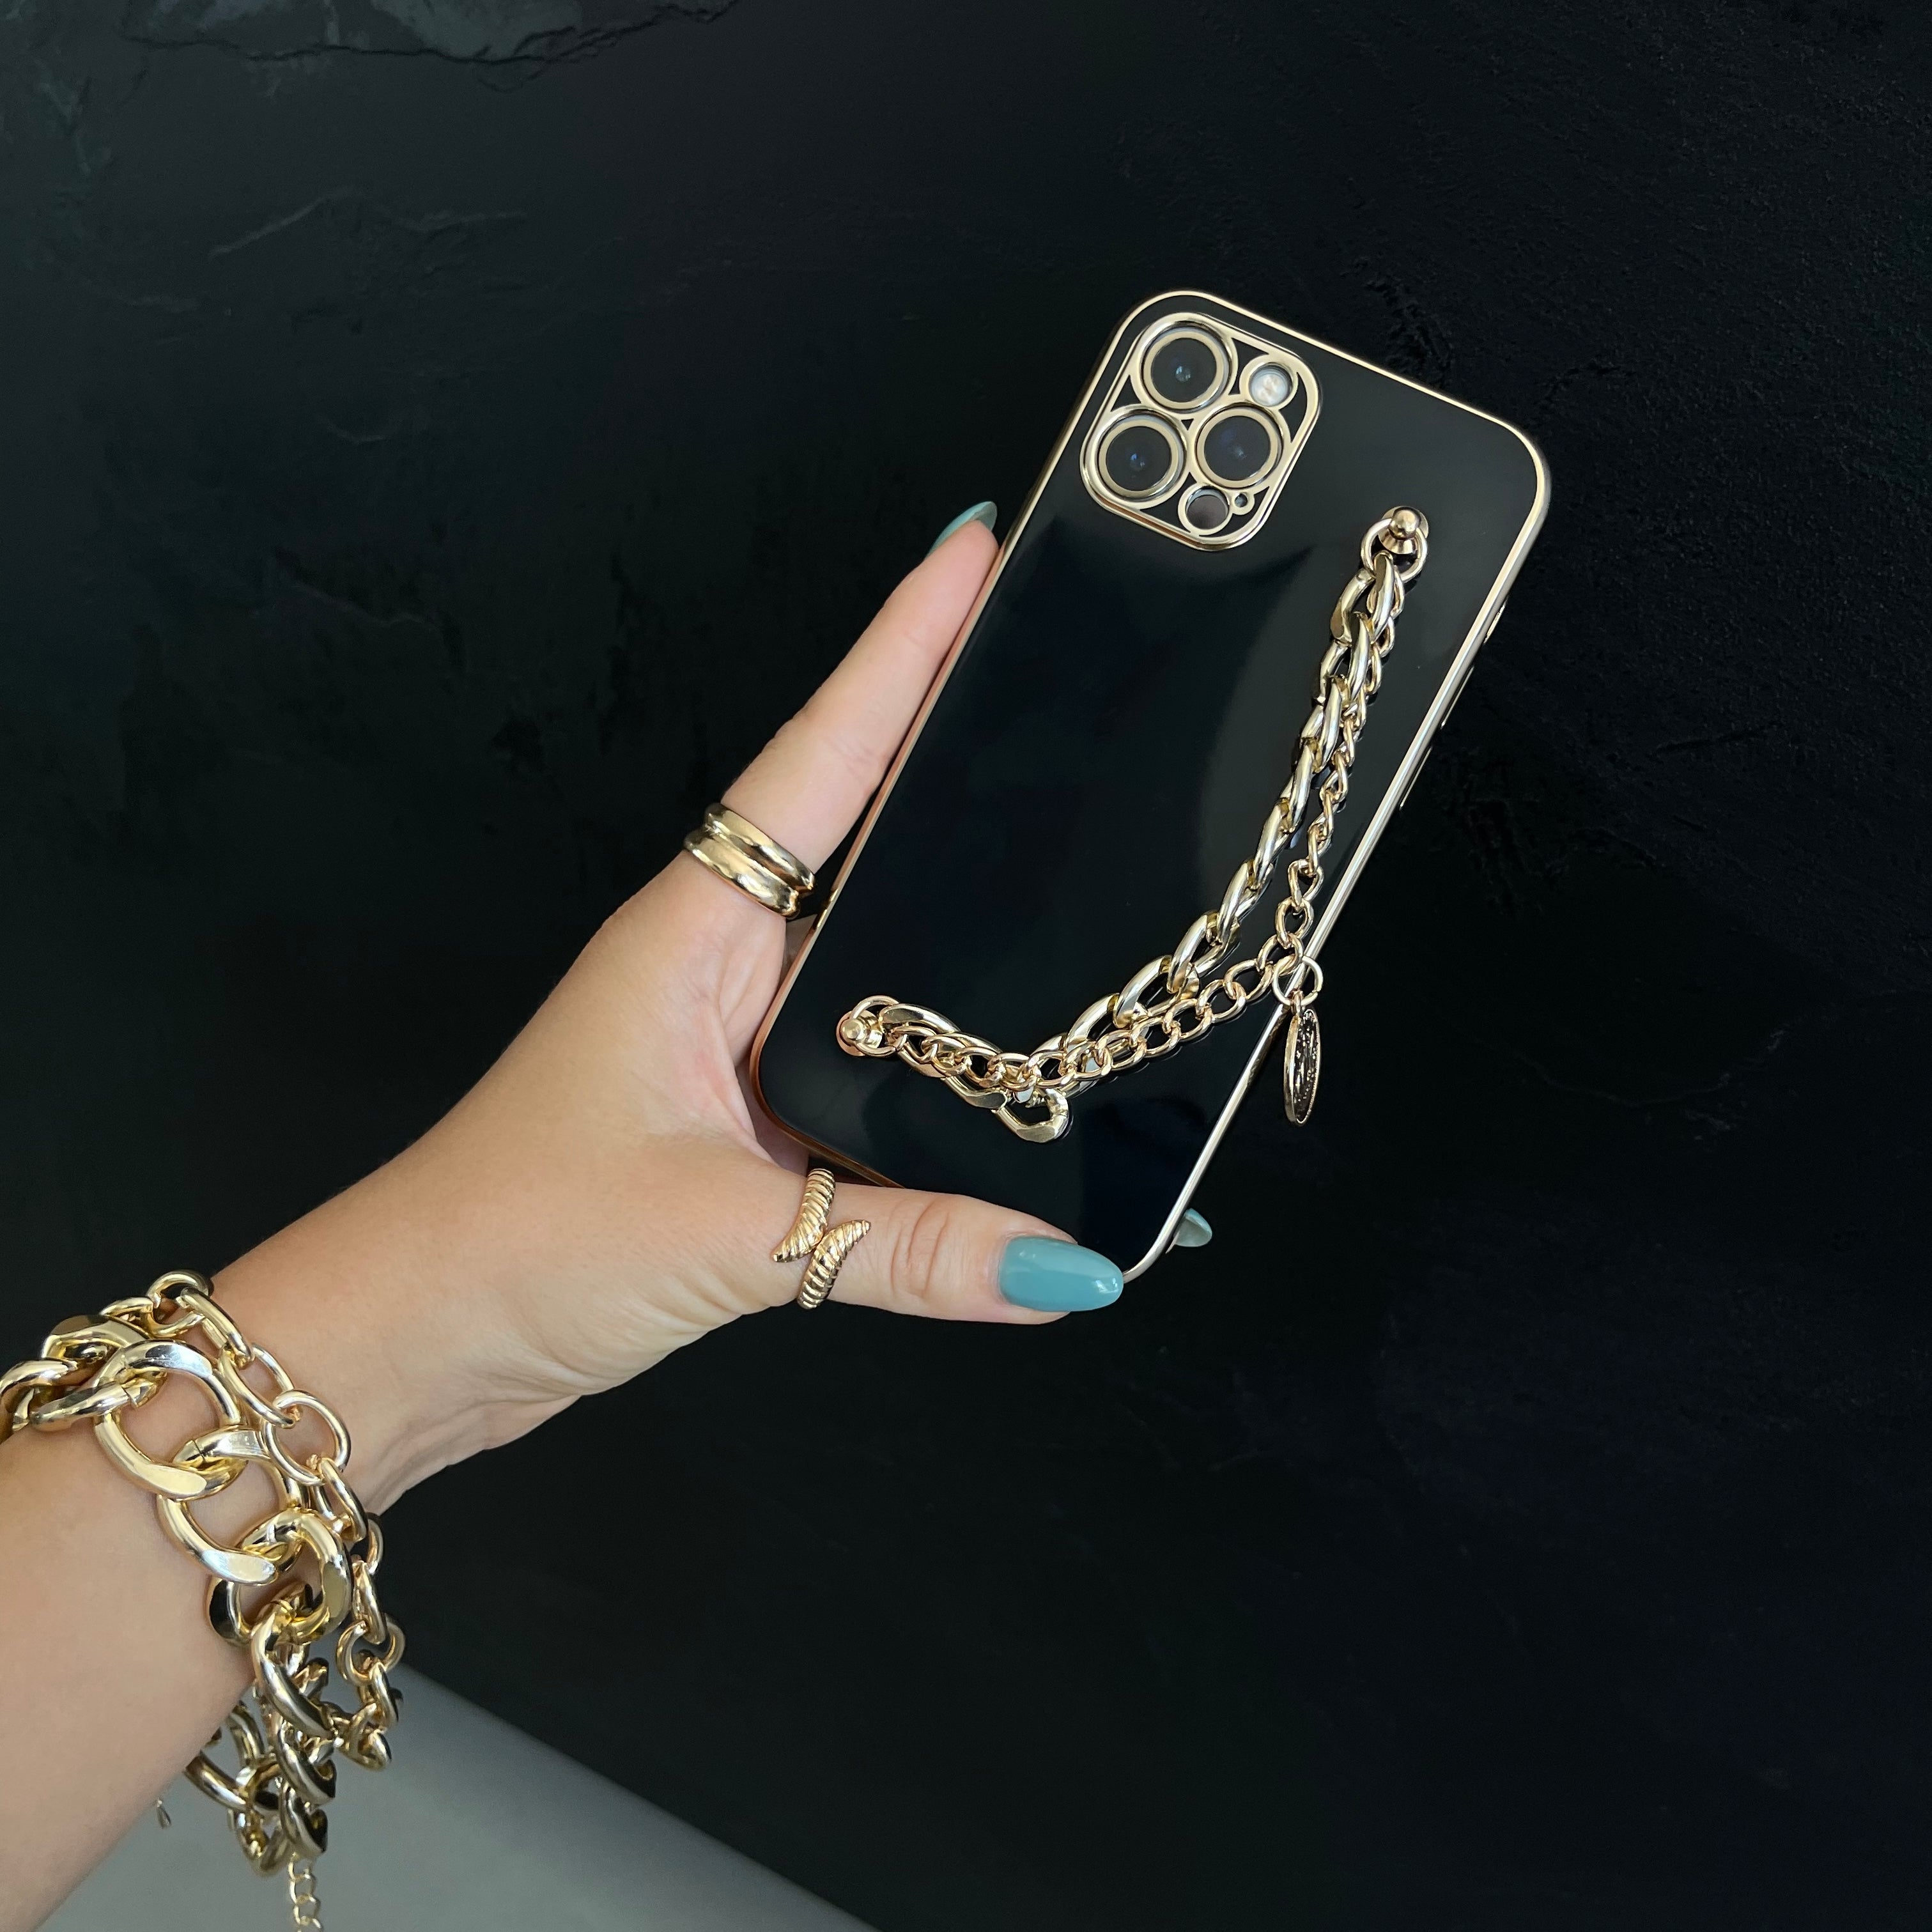 iPhone Case With Gold Chain